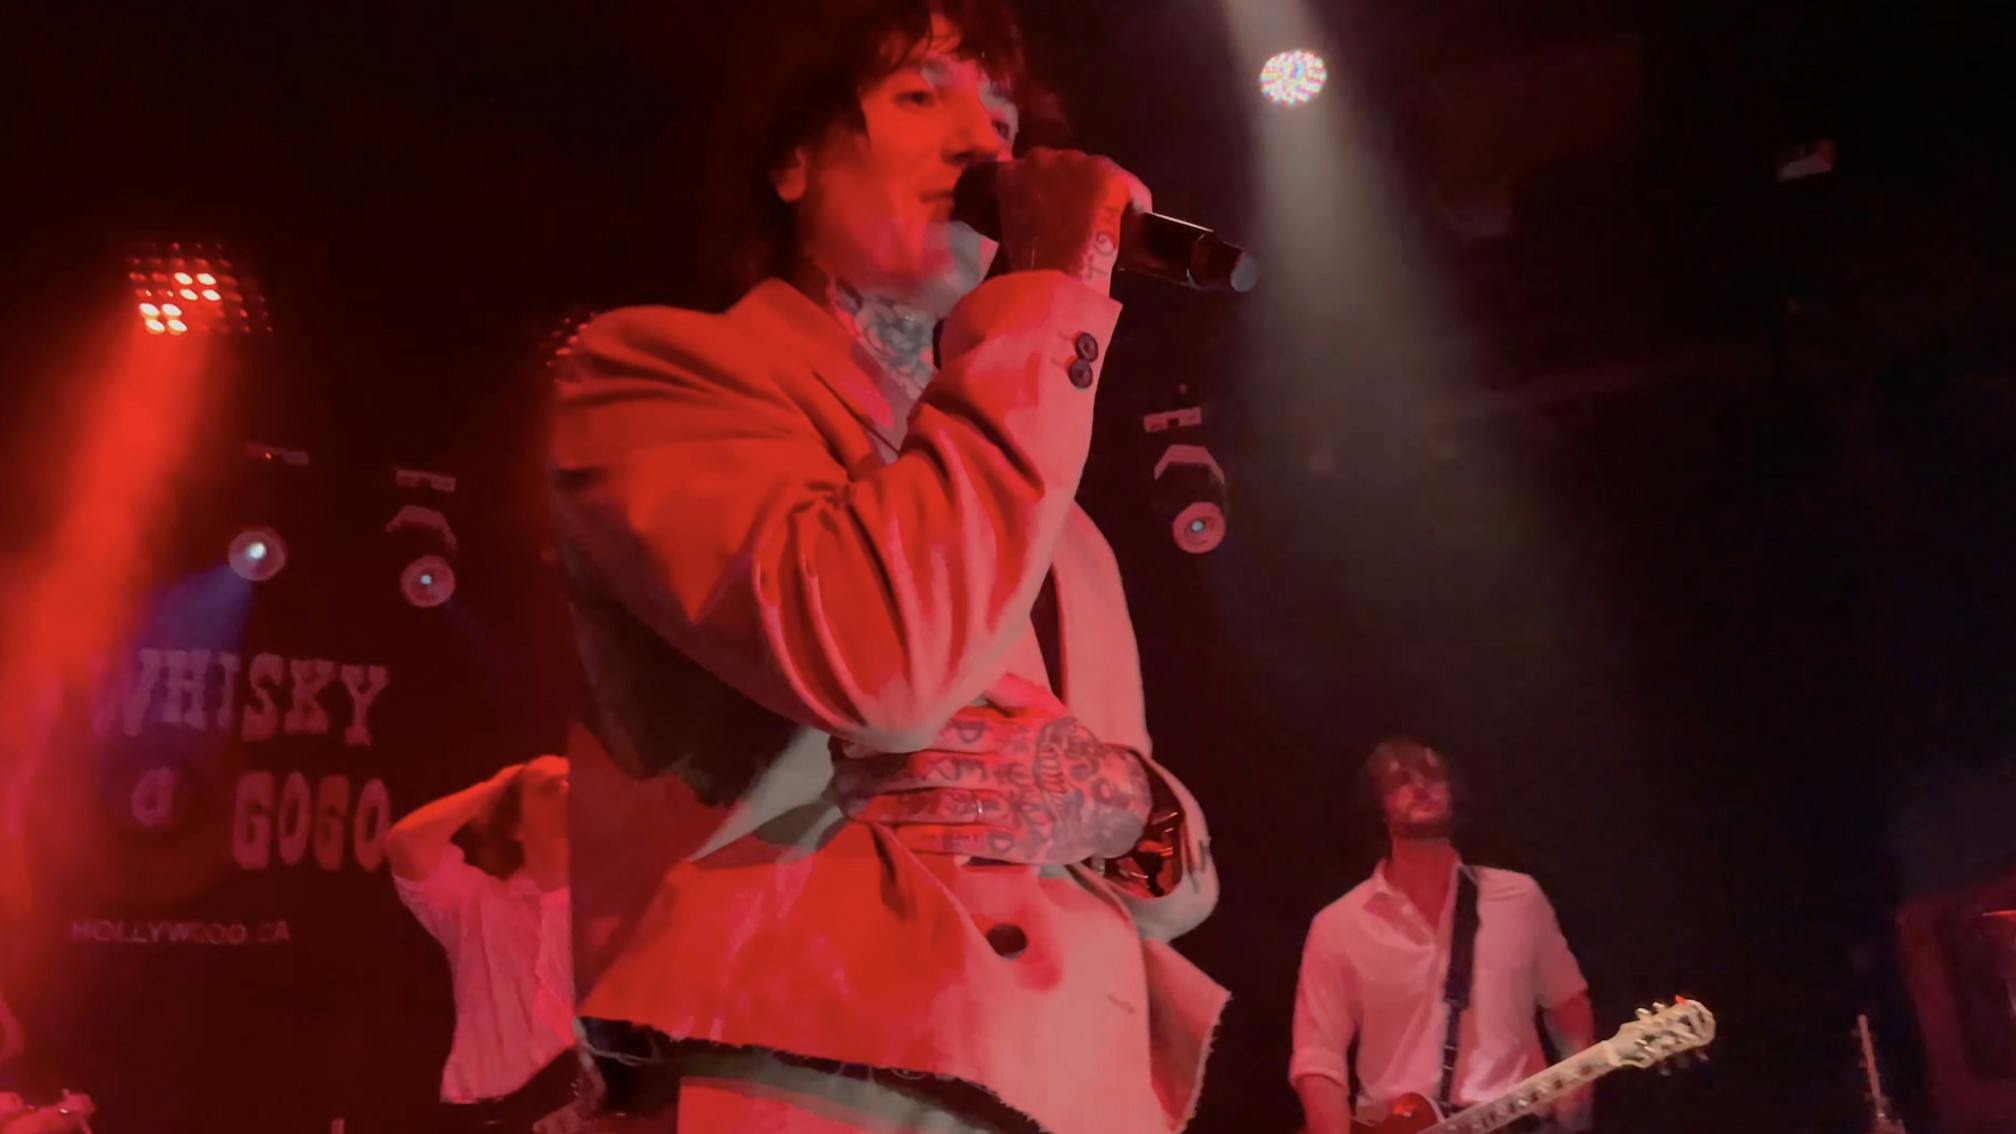 Watch: Bring Me The Horizon play wild intimate show at LA's Whisky a Go Go